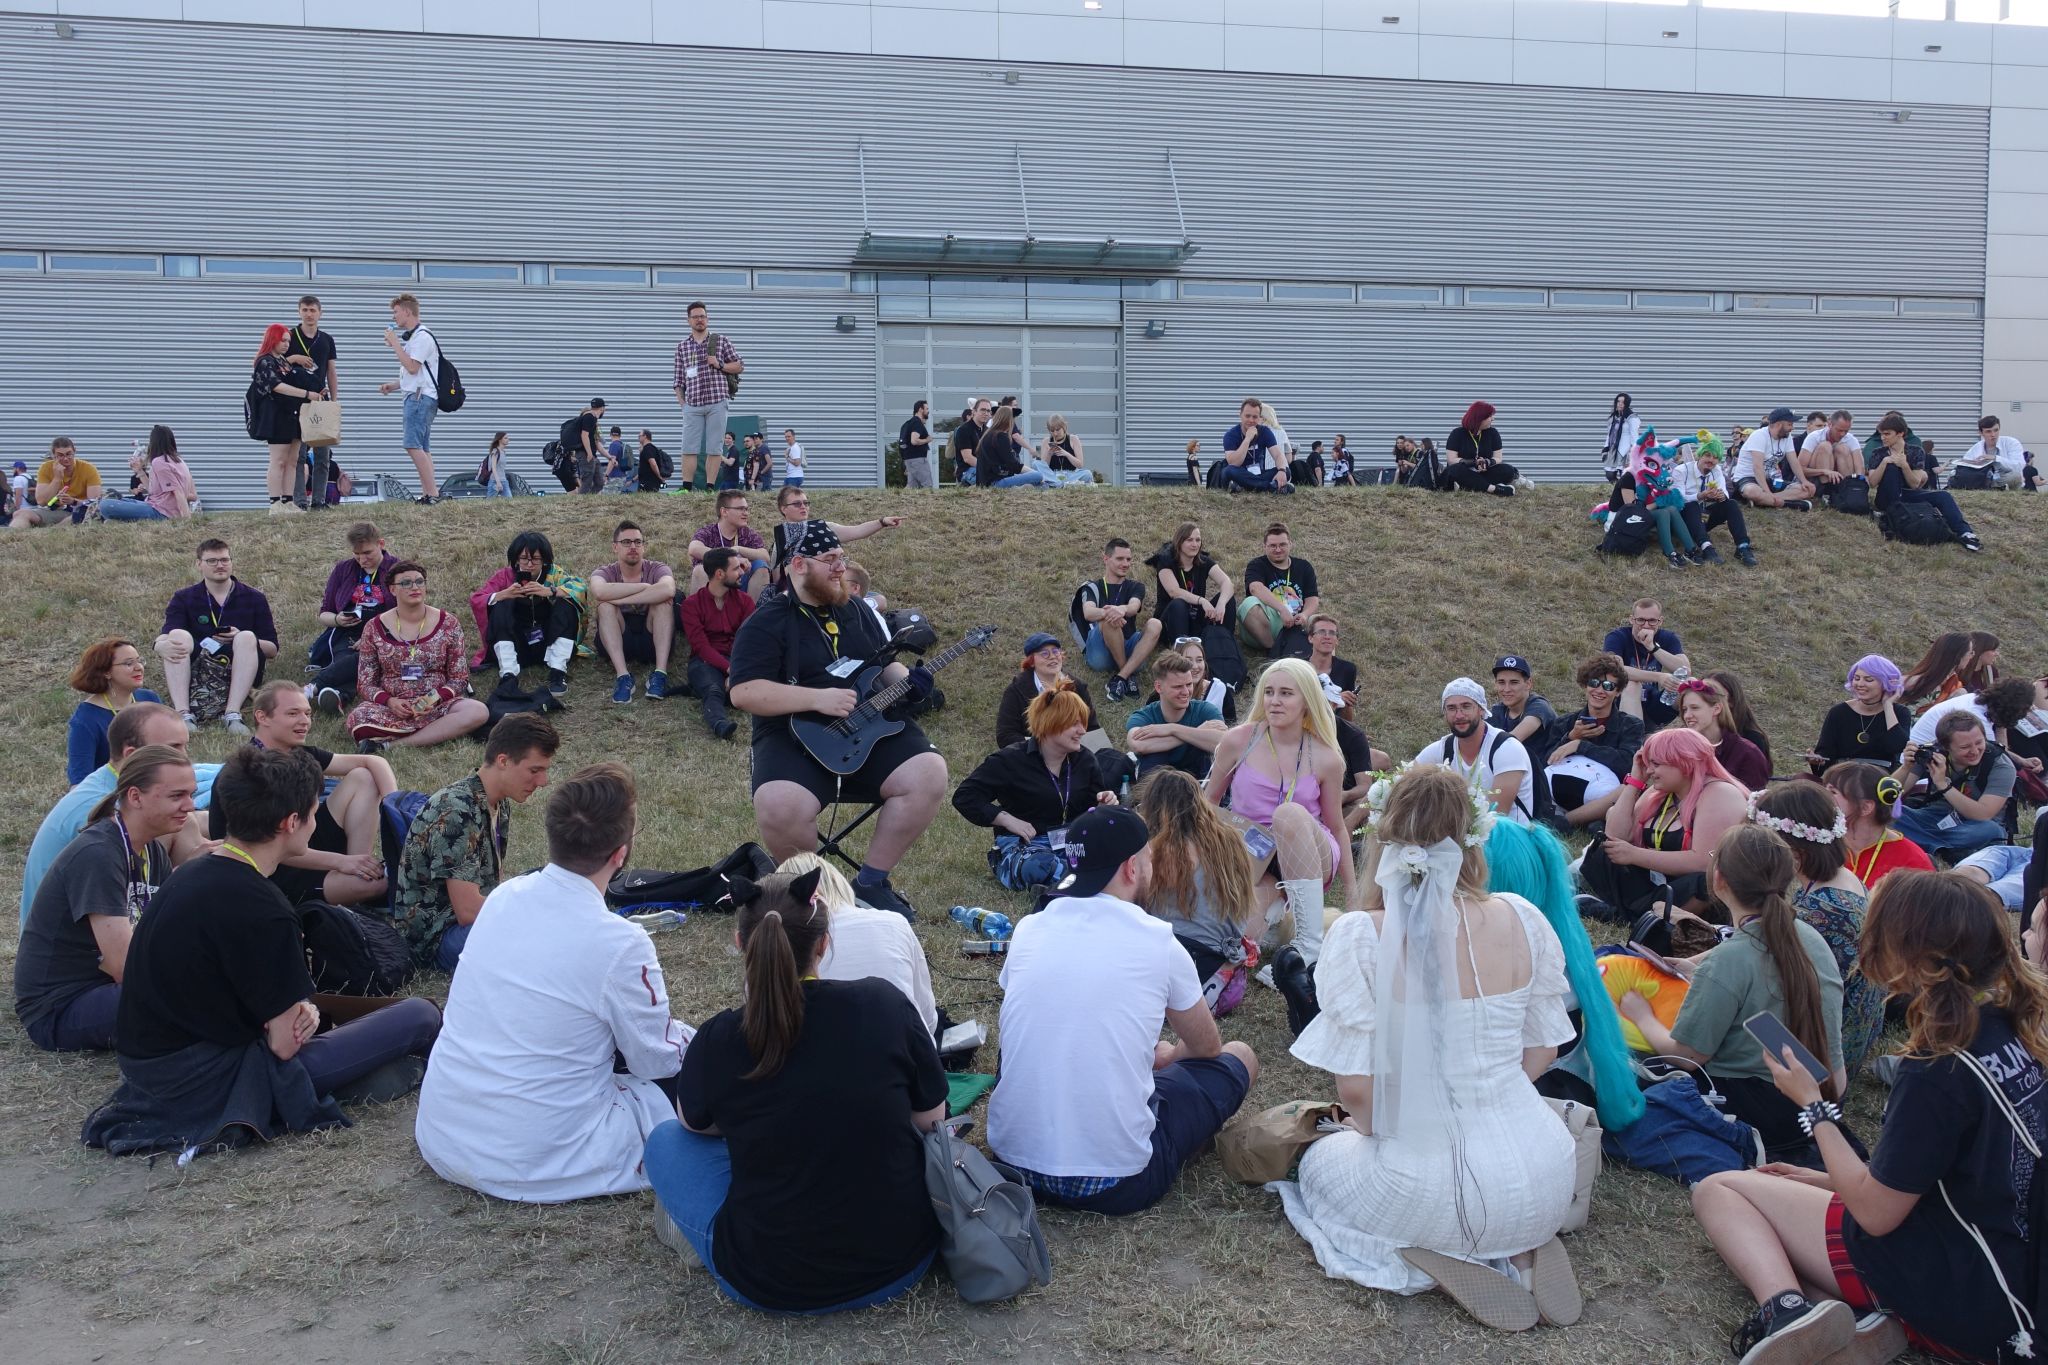 Picture was taken outdoors and shows a group of people surrounding a man playing the guitar.